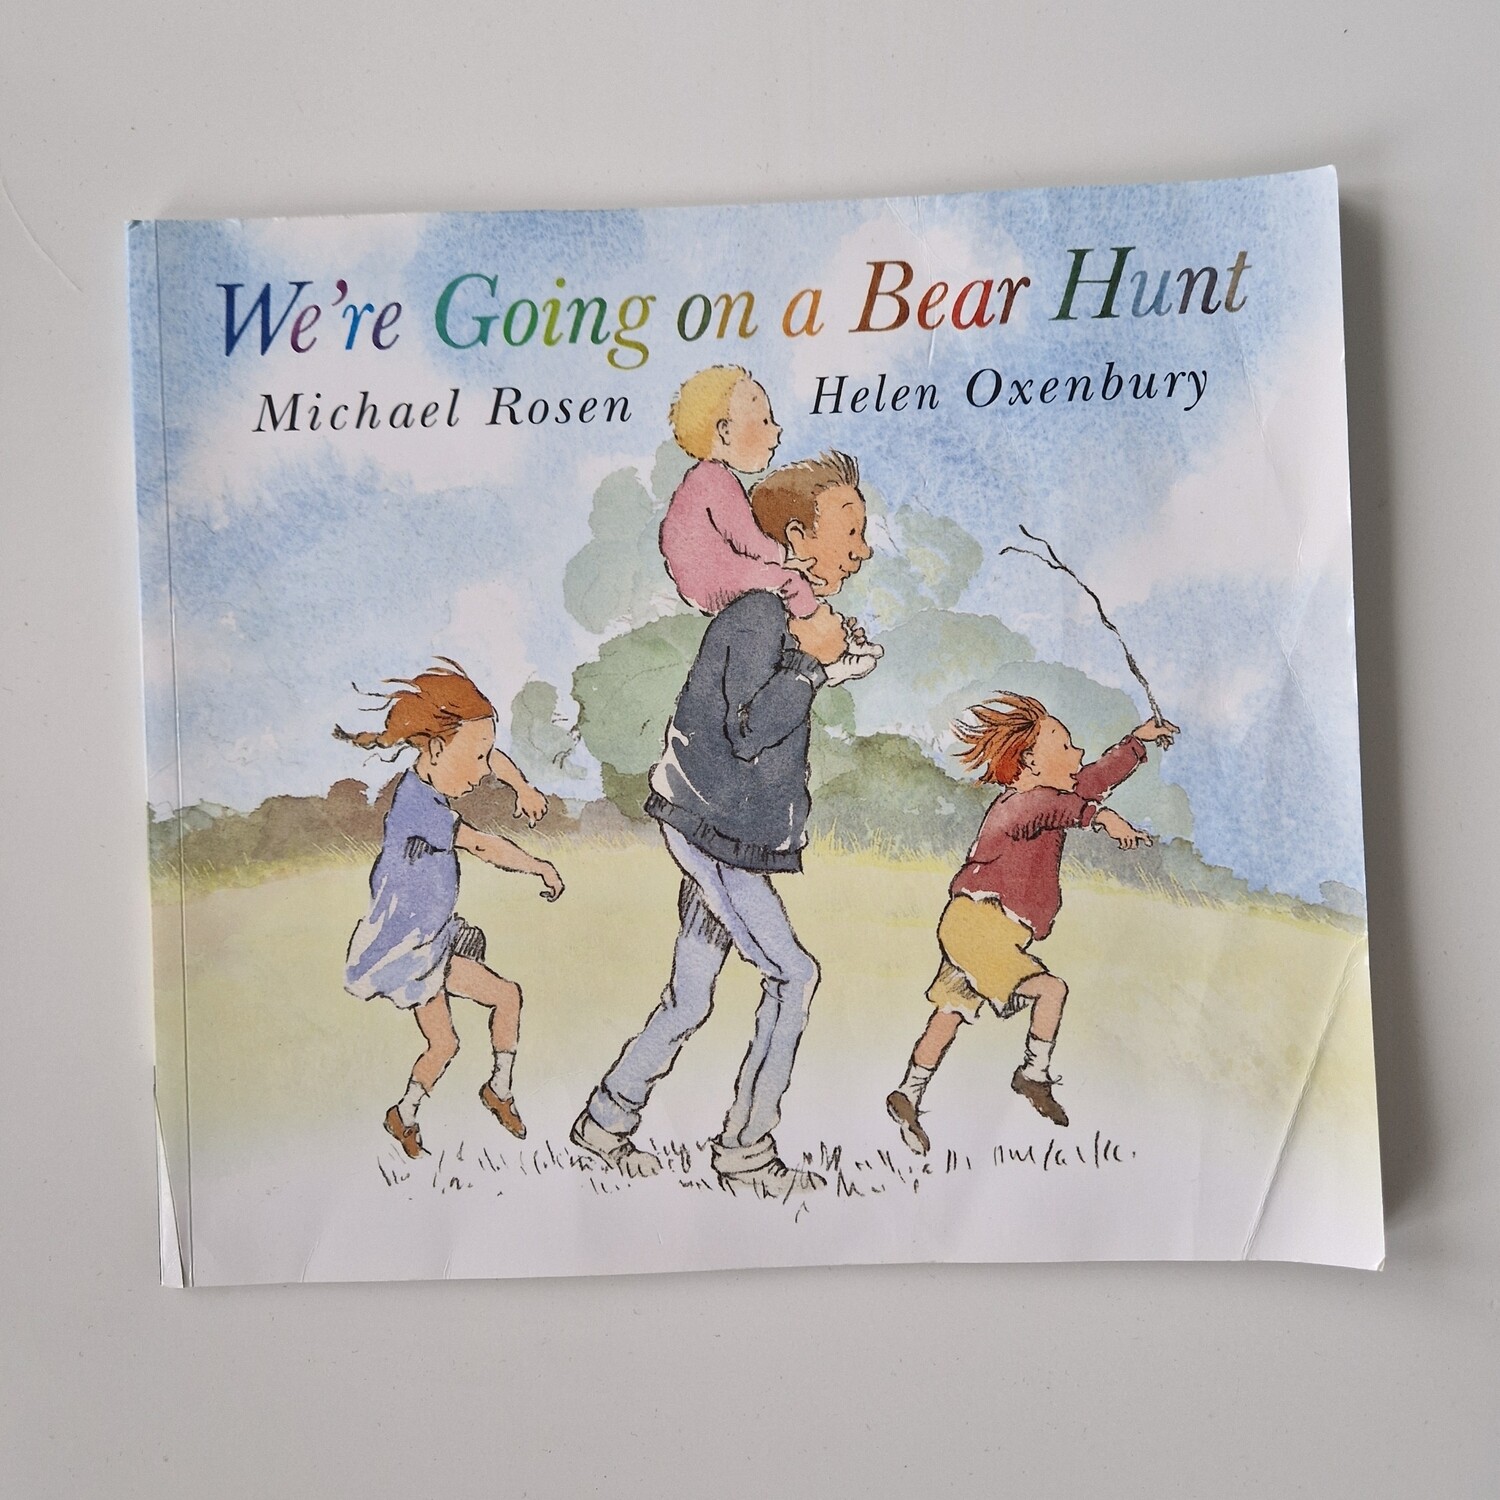 We're Going on  a Bear Hunt- made from a paperback book - no original book pages